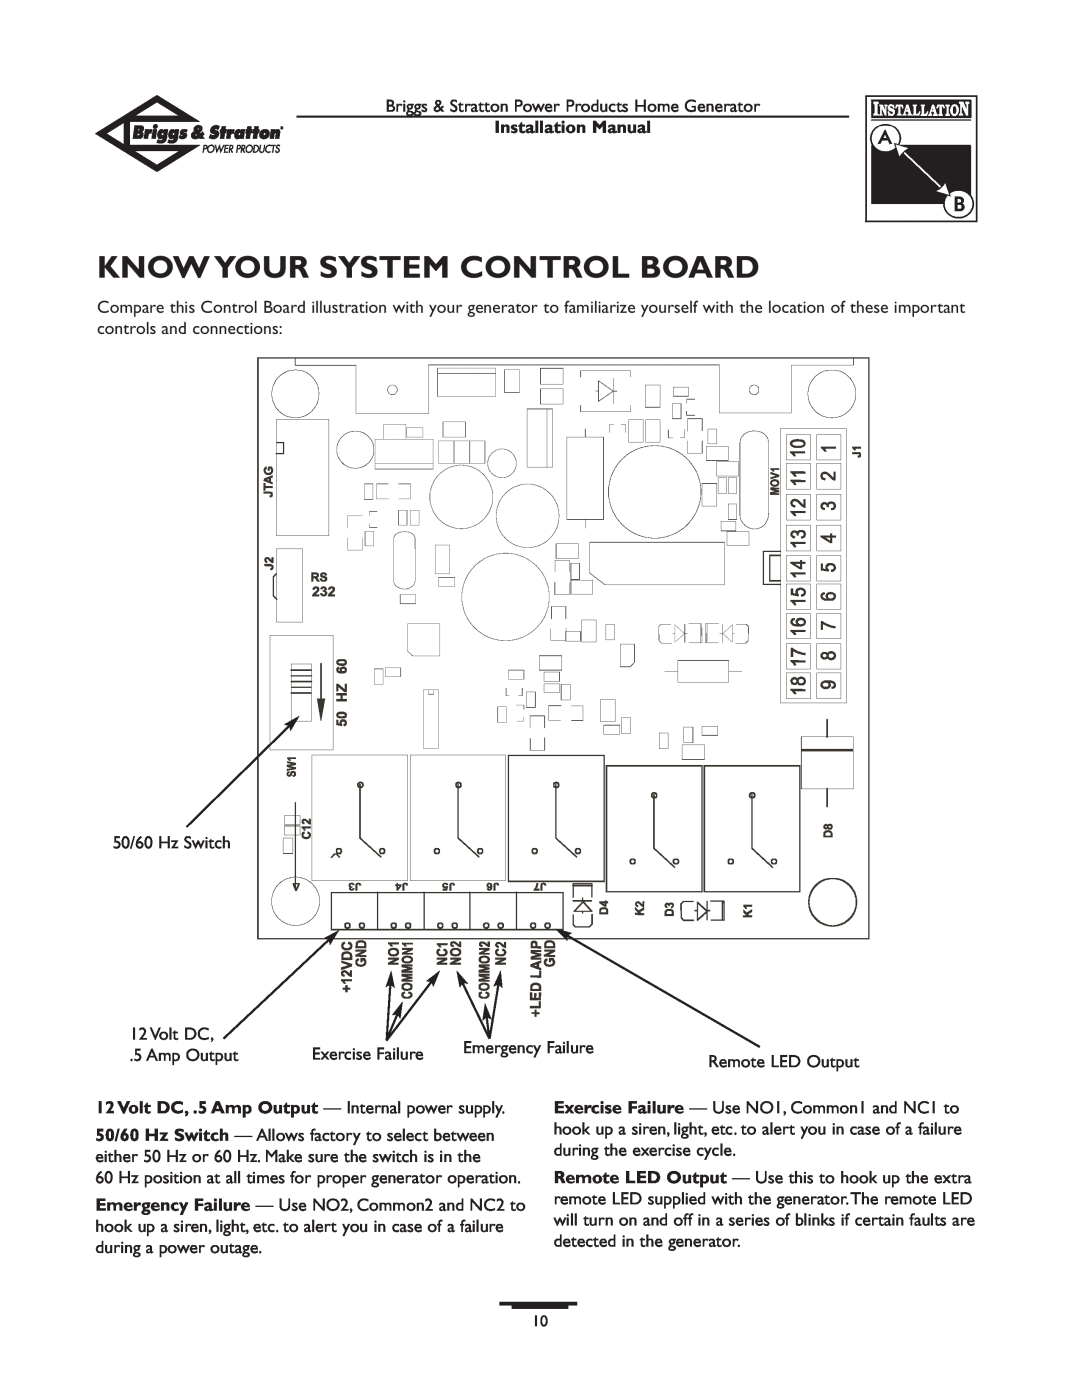 Briggs & Stratton 01938-0 manual Know Your System Control Board, Volt DC, .5 Amp Output — Internal power supply 